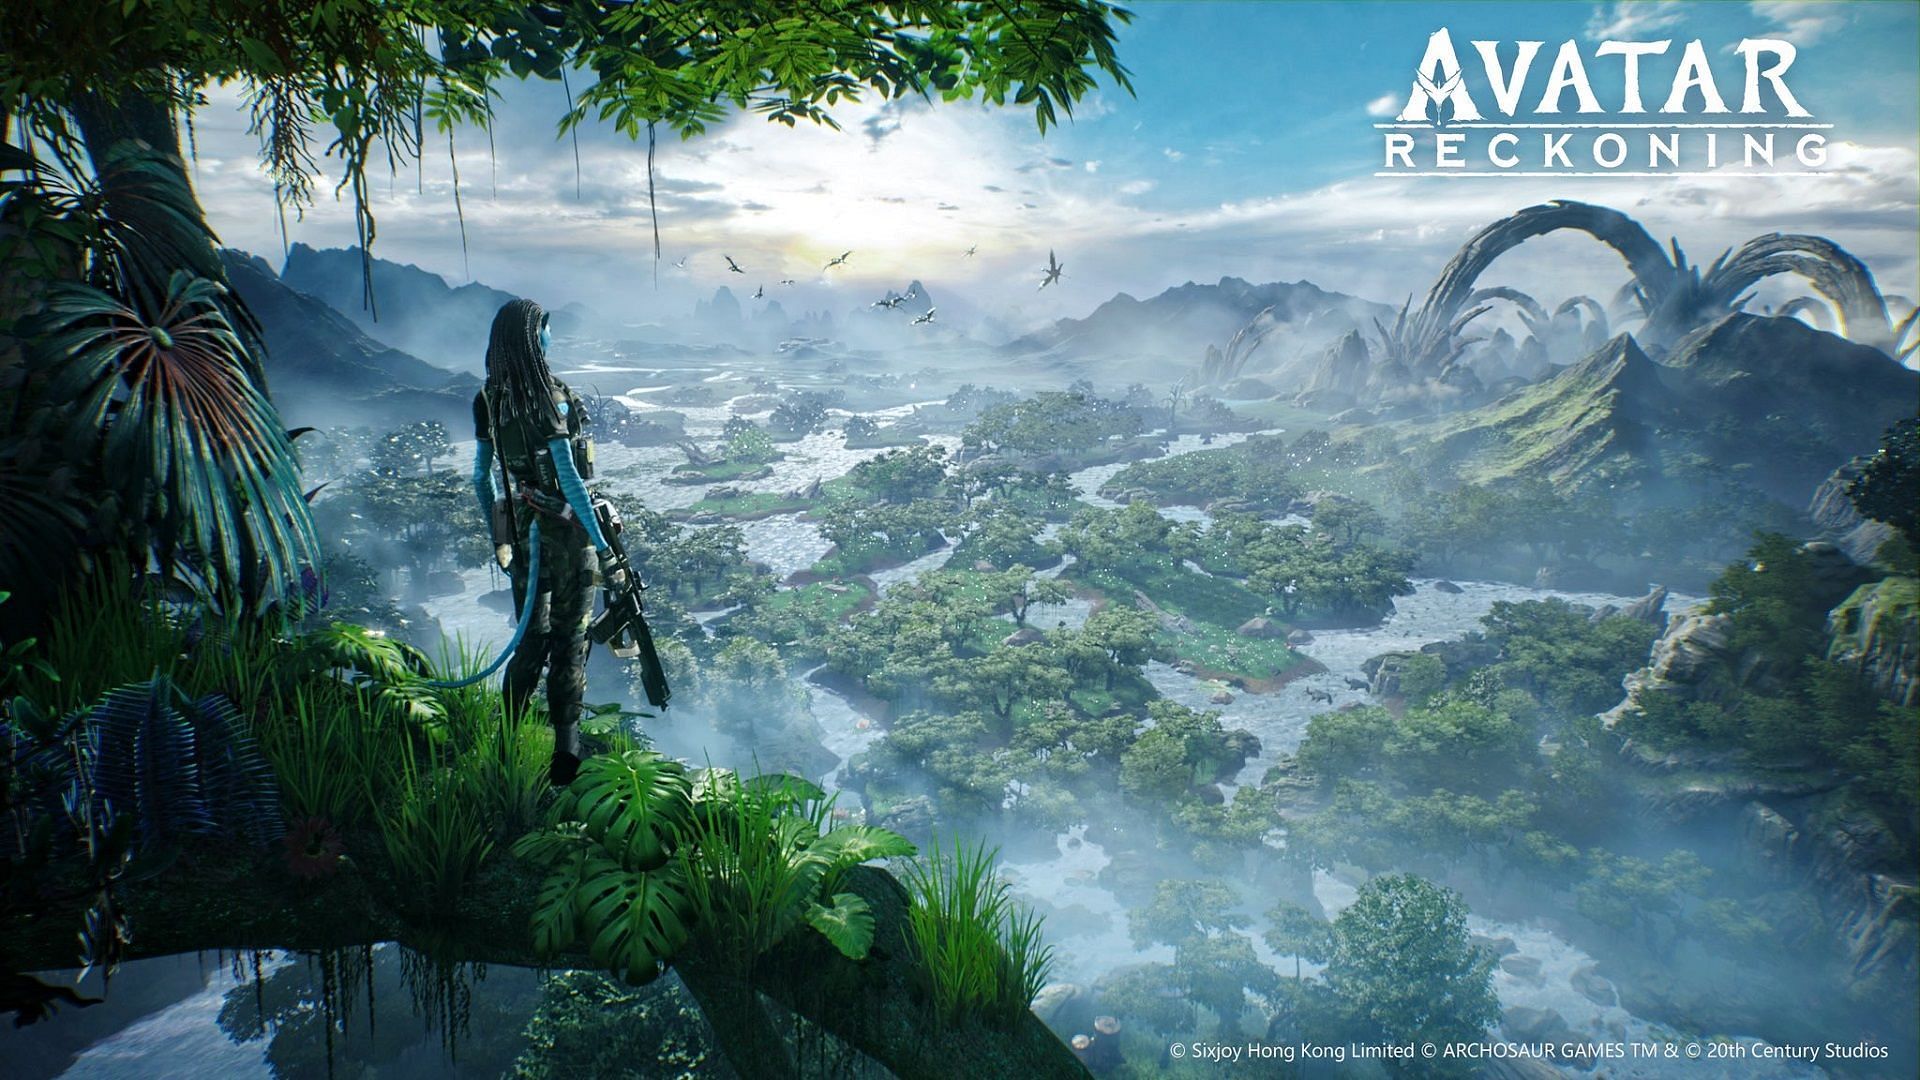 A mobile-only MMORPG set in the world of Avatar (Image via Archosaur Games)